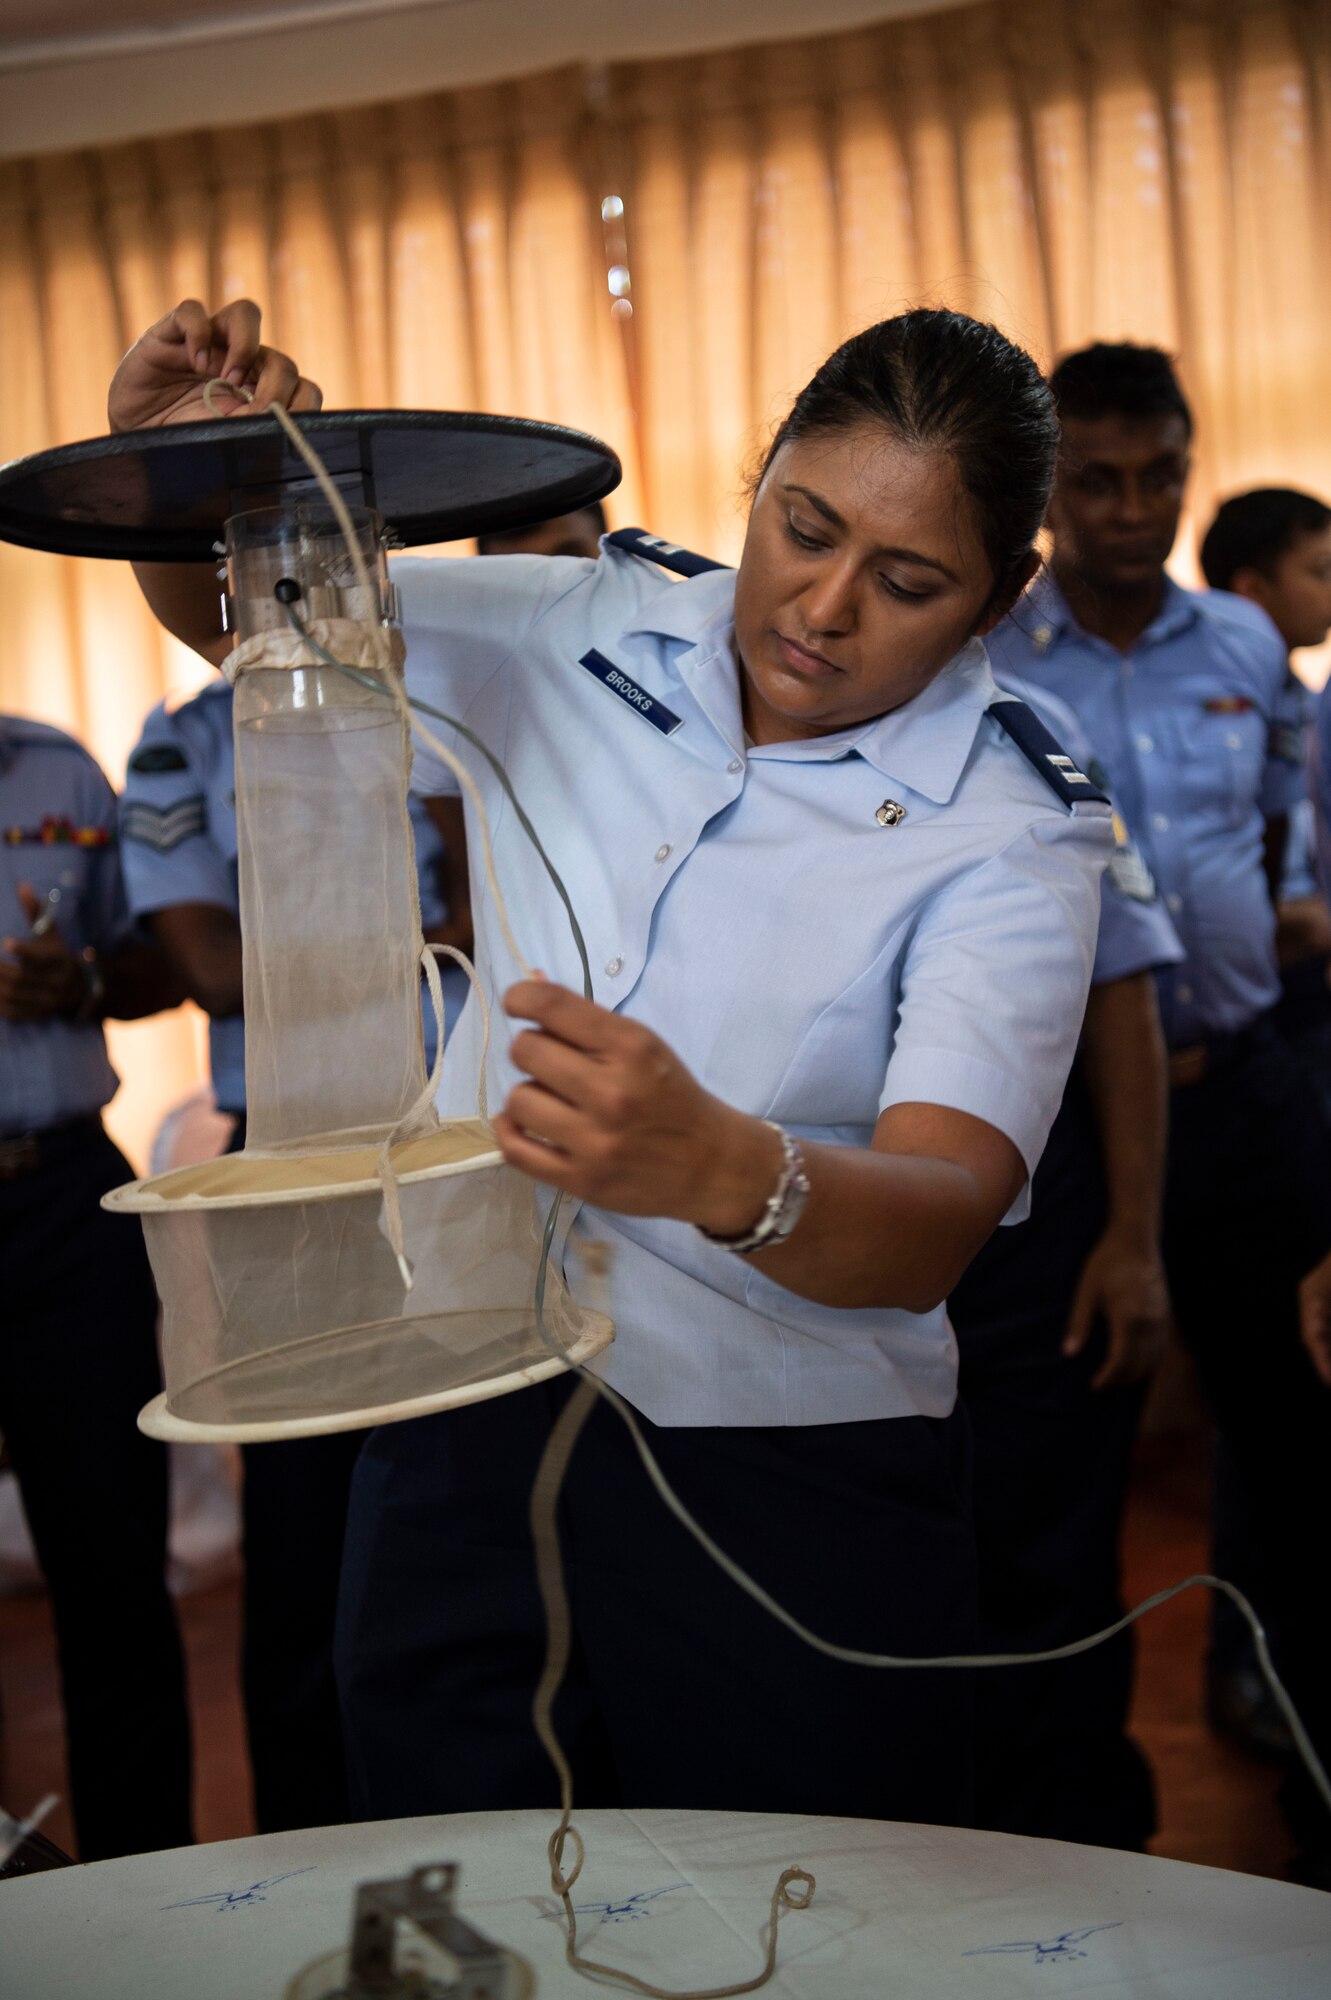 U.S. Air Force Capt. Caroline Brooks, 18th Aerospace Medicine Squadron medical entomologist, builds a mosquito trap during an exchange for Pacific Angel (PAC ANGEL) 18-4, in Anuradhapura, Sri Lanka, Aug. 9, 2018. PAC ANGEL 18 fosters partnerships though multilateral humanitarian assistance and civil military operations, which promote regional cooperation and interoperability. (U.S. Air Force photo by Tech. Sgt. Heather Redman)